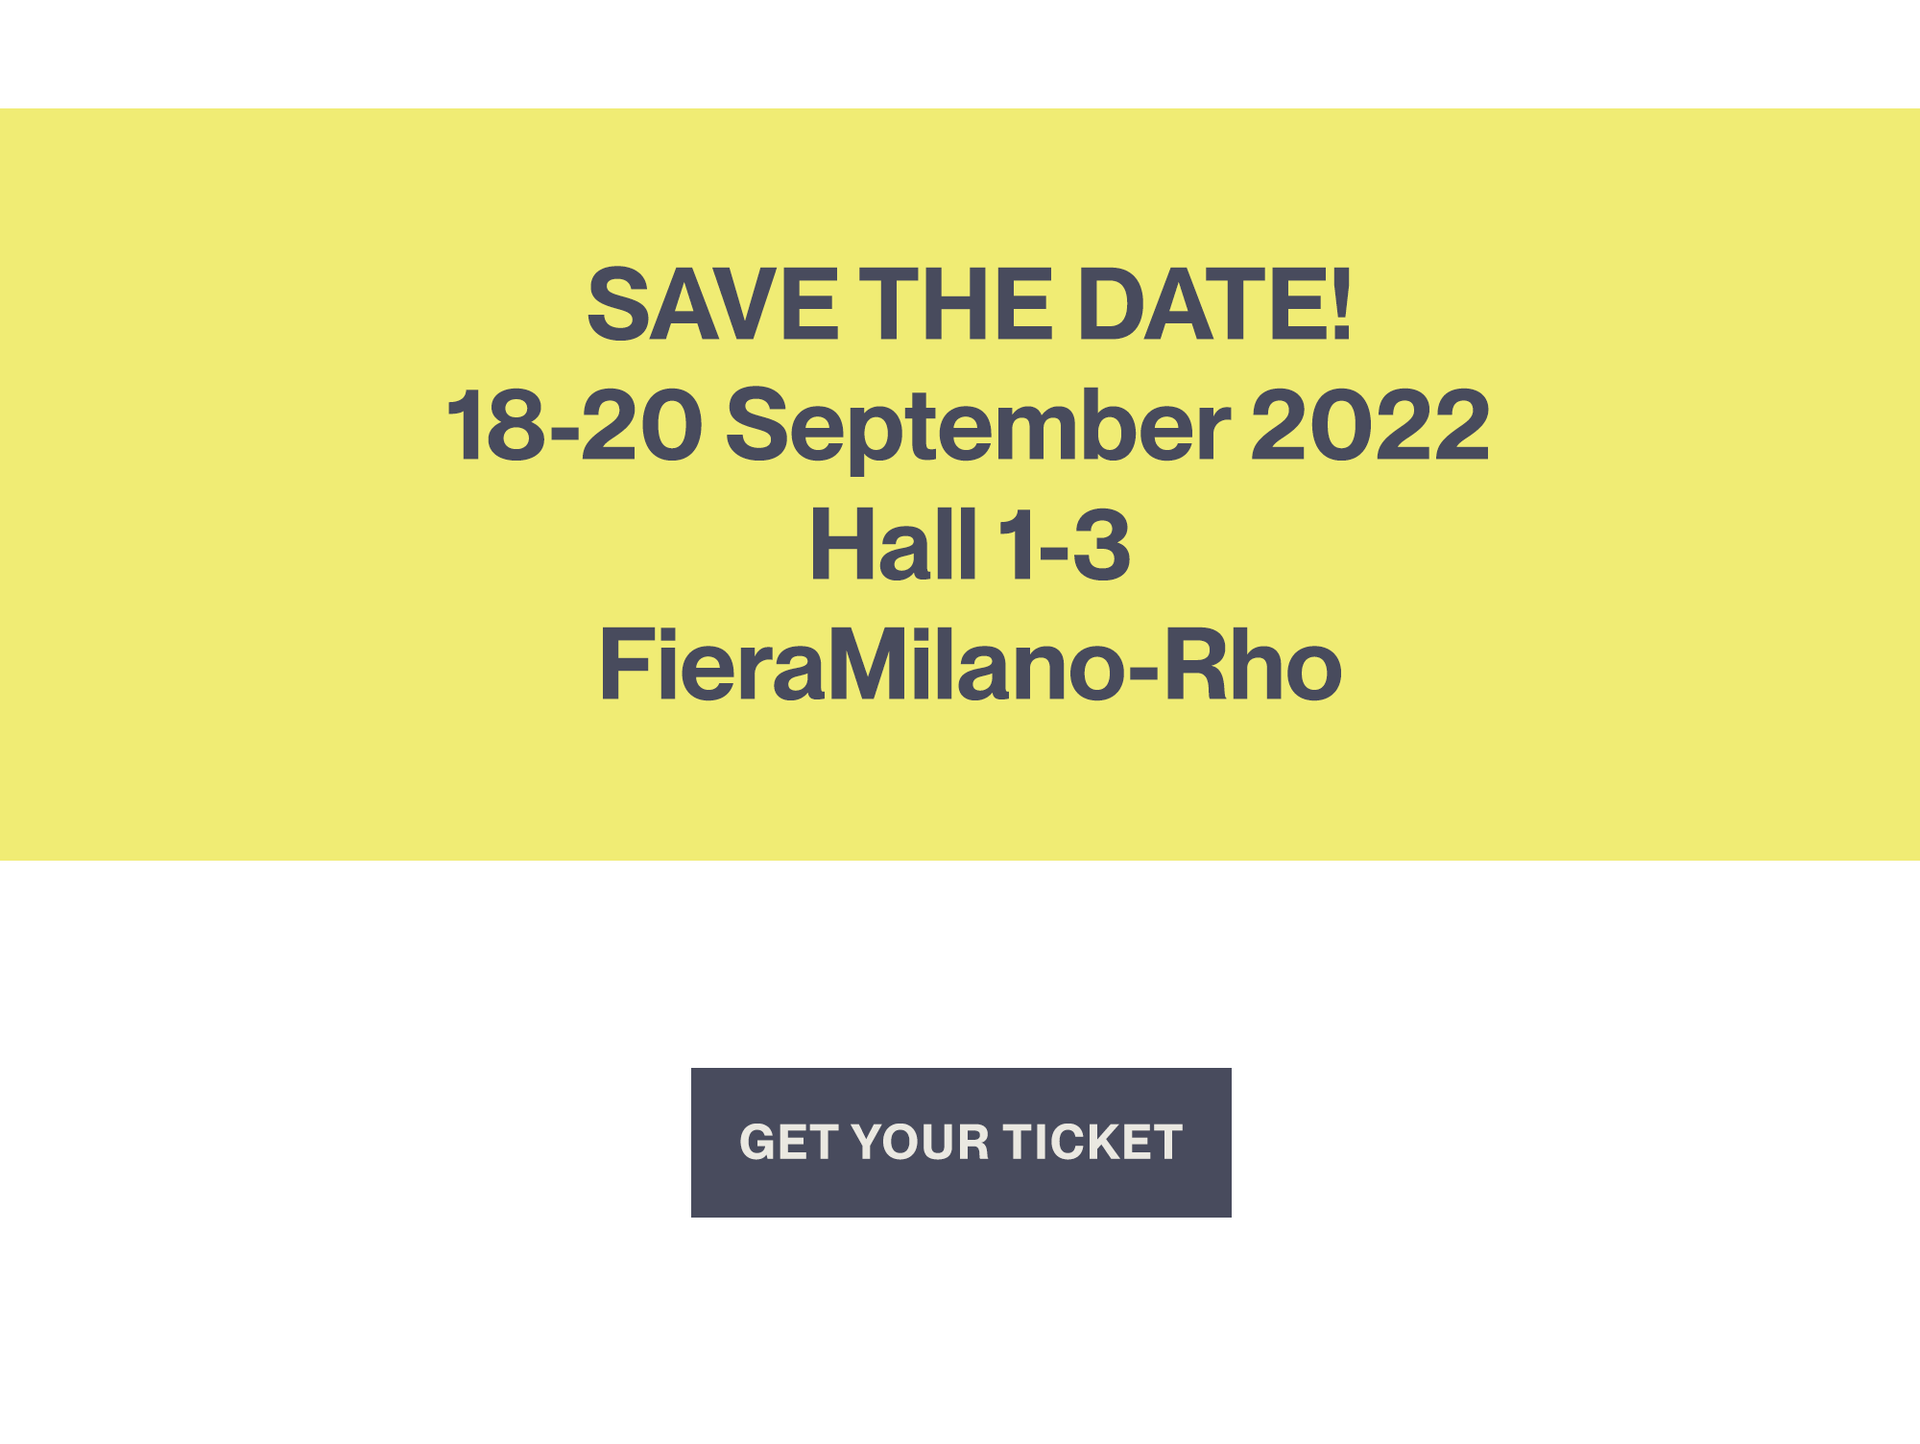 MIPEL122 SAVE THE DATE (18/20 September 2022) - HURRY UP! GET YOUR TICKET HERE